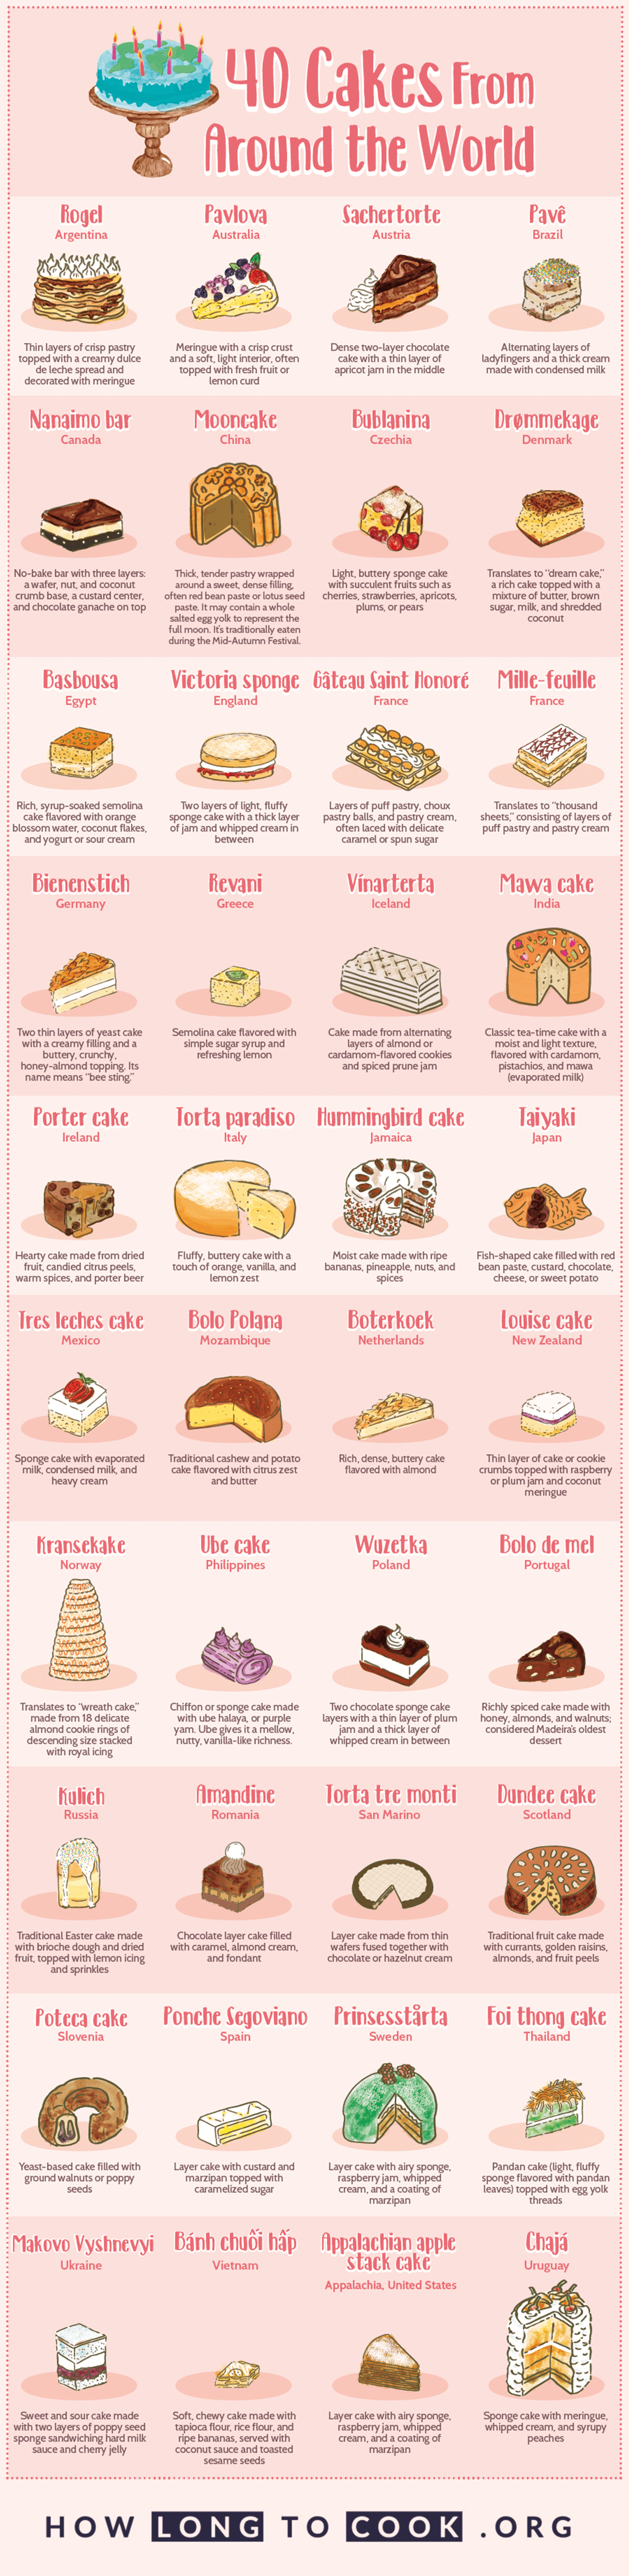 cakes from around the world